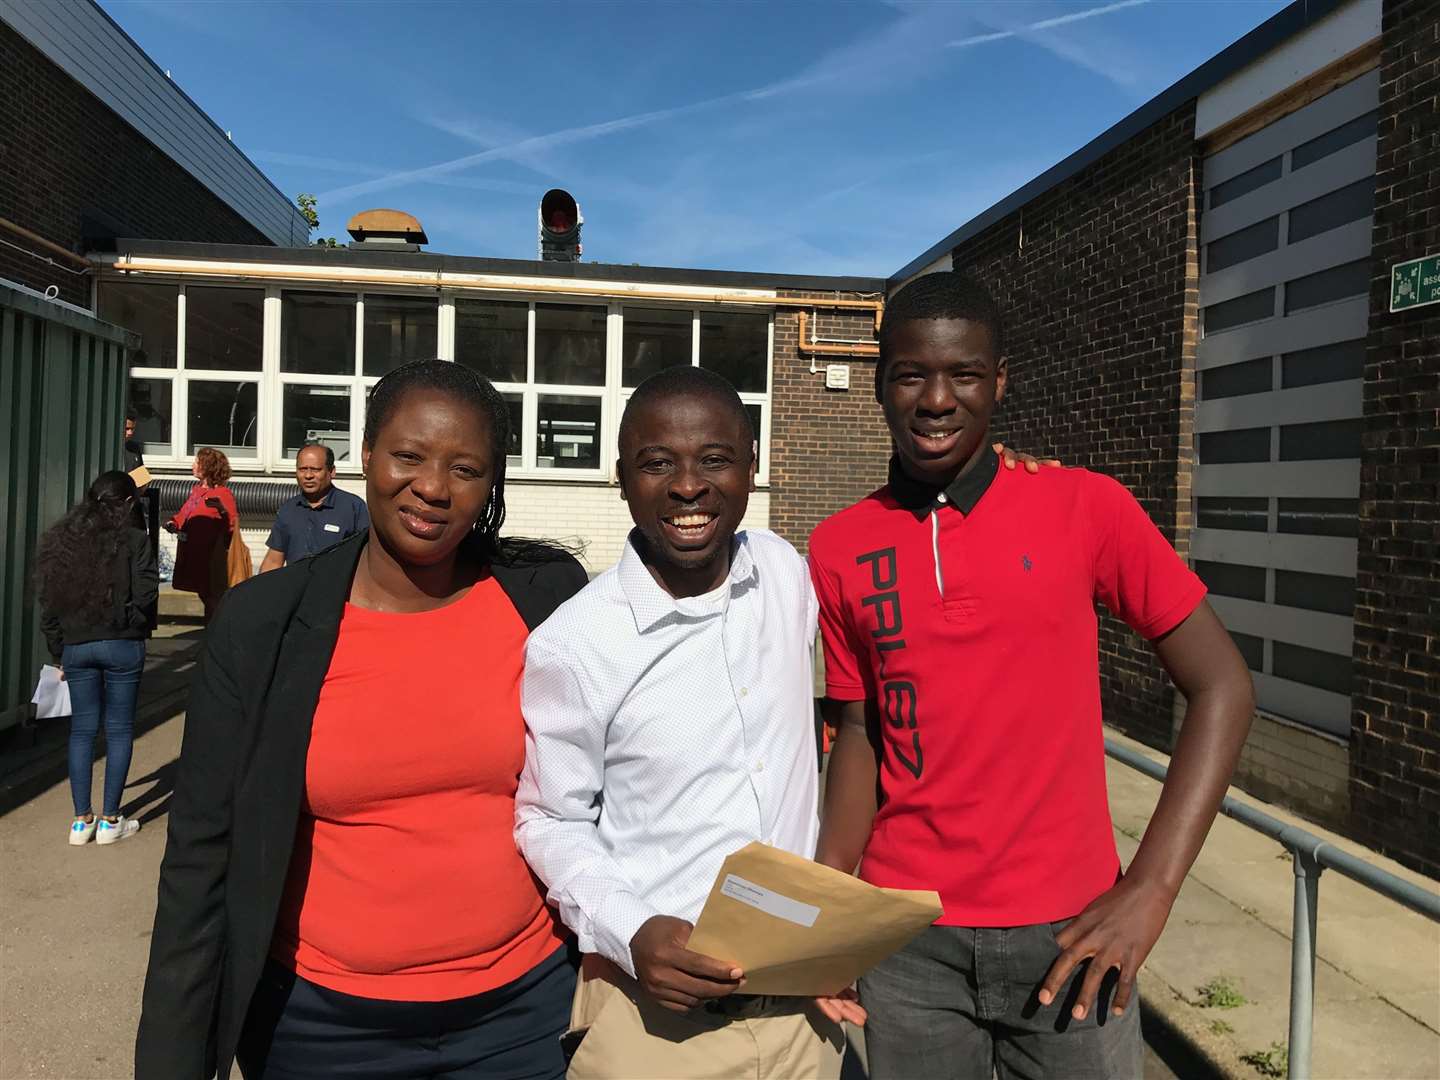 Deminion Shoroye, 16, from Slade Green, with parents Samuel and Bola (15604406)